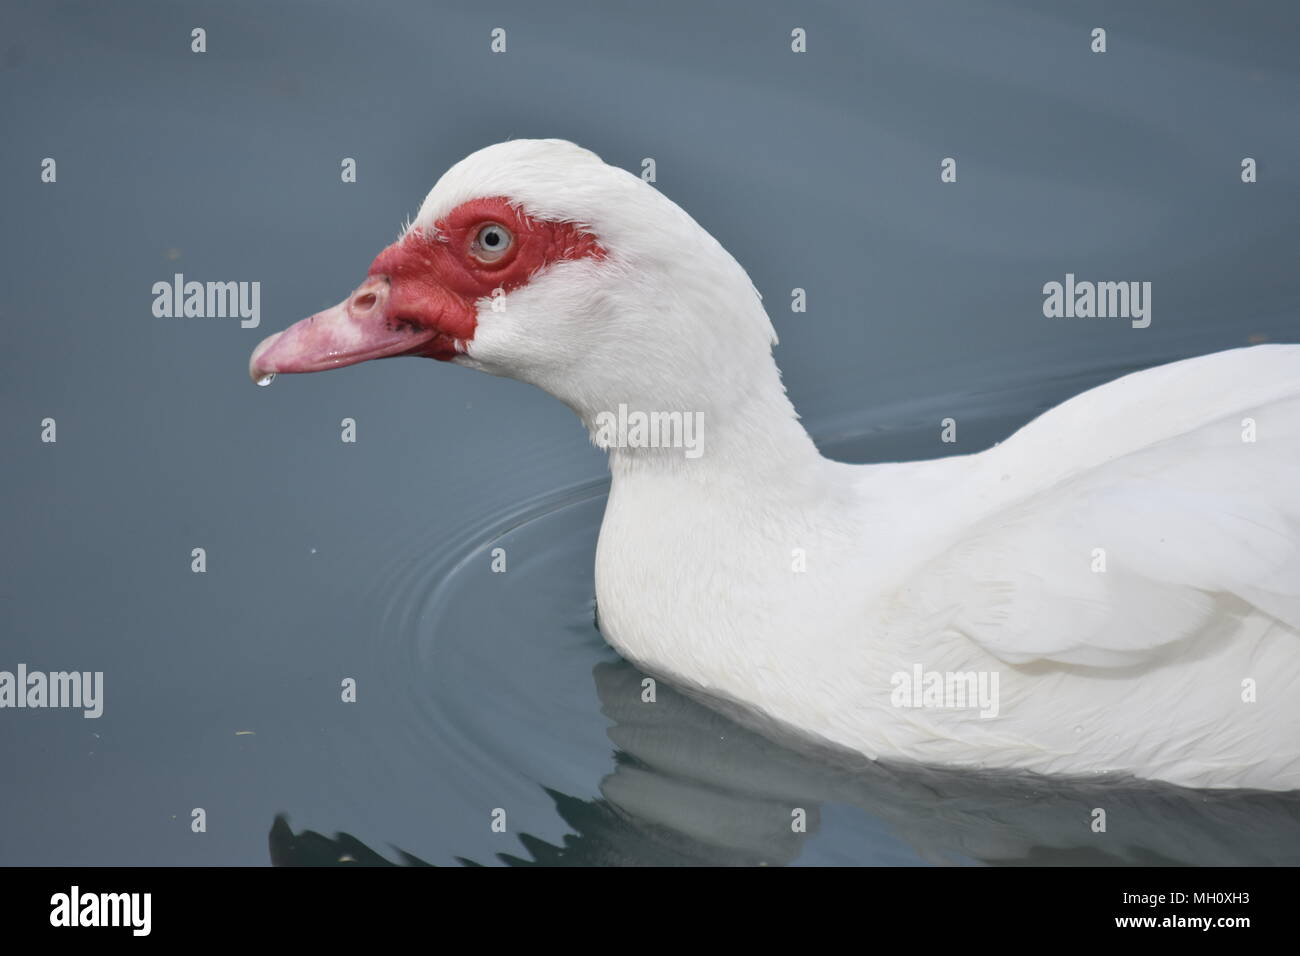 Red Faced Duck Stock Photo